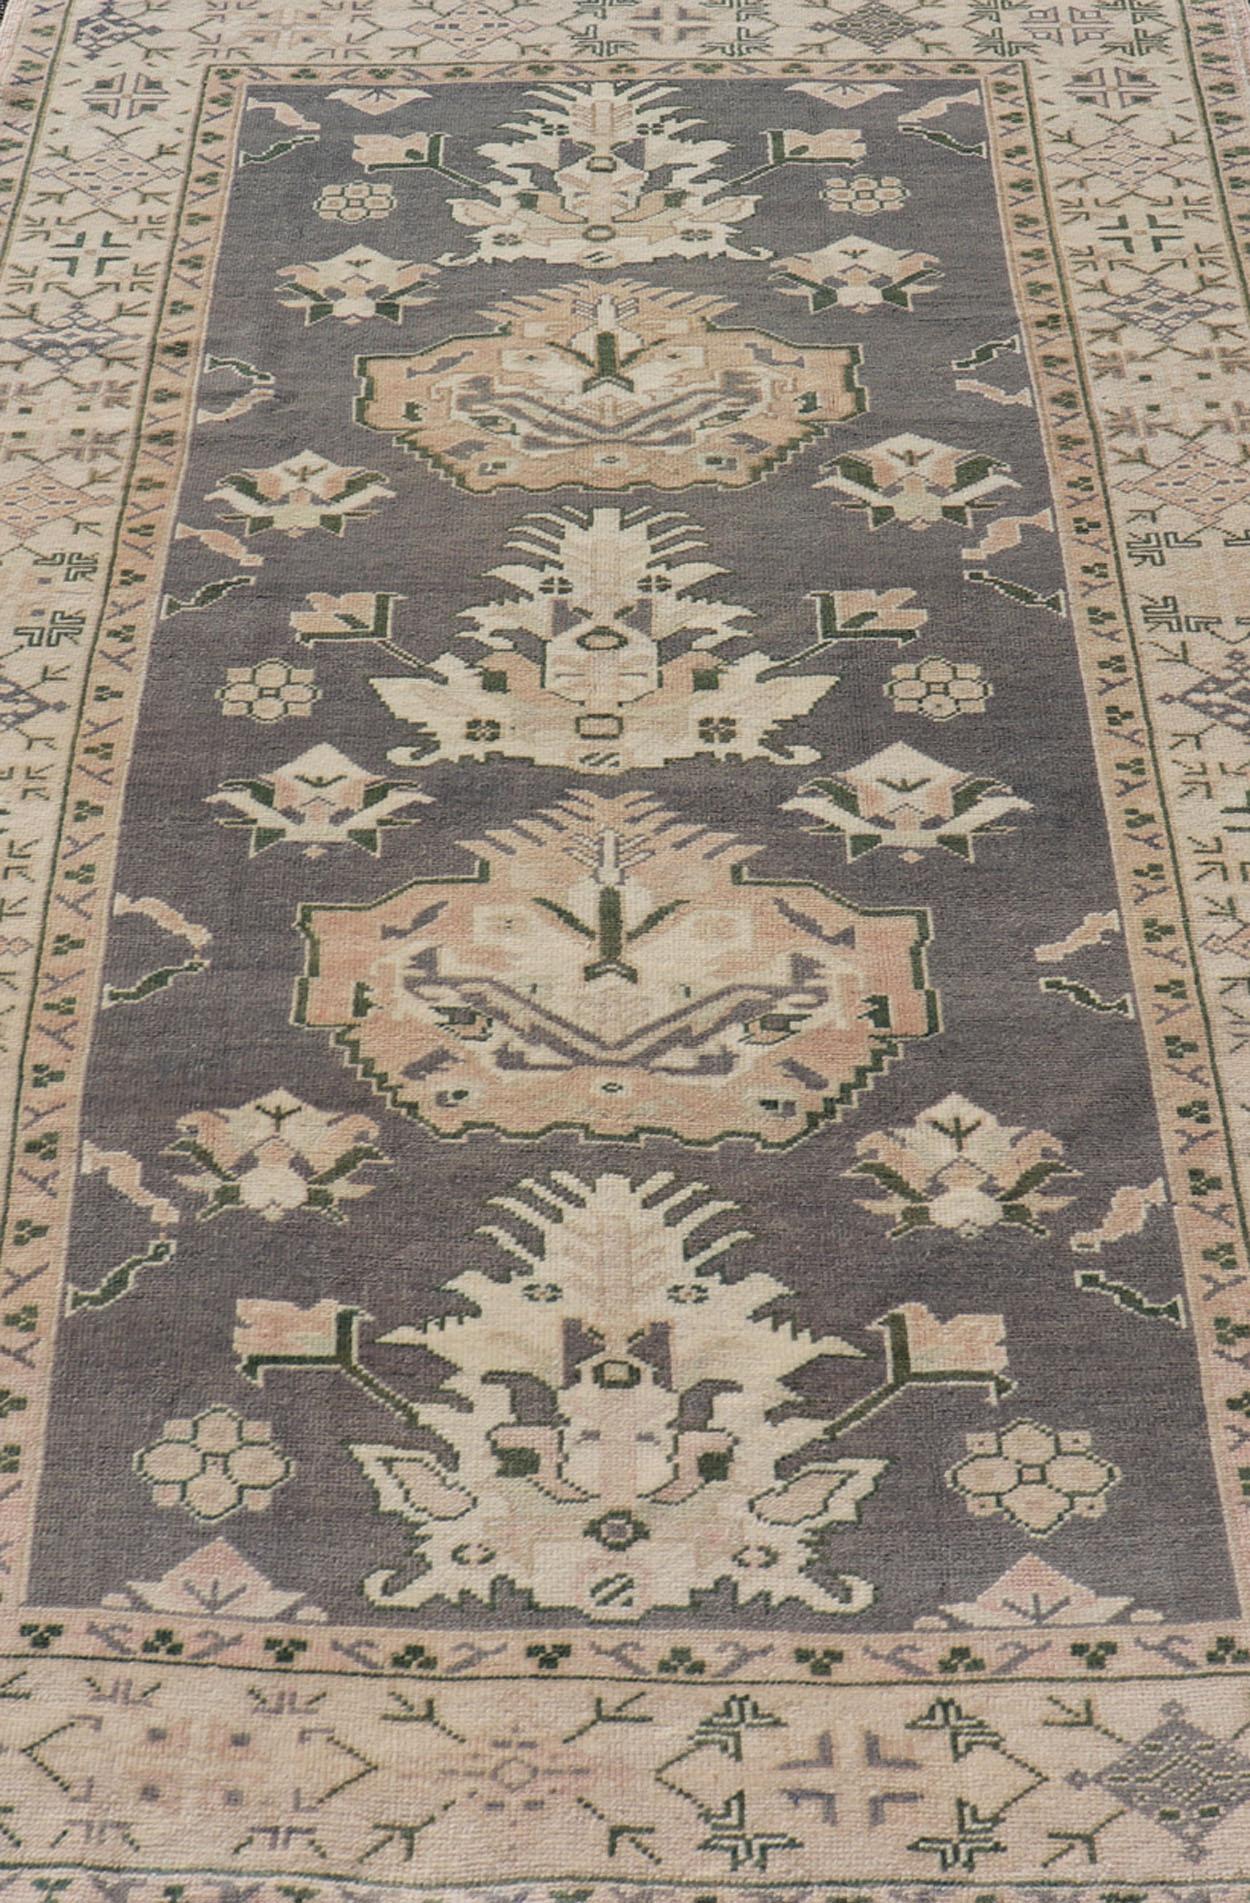 Measures: 4'8 x 7'5 
Turkish Oushak Rug Vintage with Three Floral Medallion Design In Blue and Cream. Keivan Woven Arts / rug EN-14201, country of origin / type: Turkey / Oushak, circa 1940
This striking vintage Turkish Oushak rug bears a